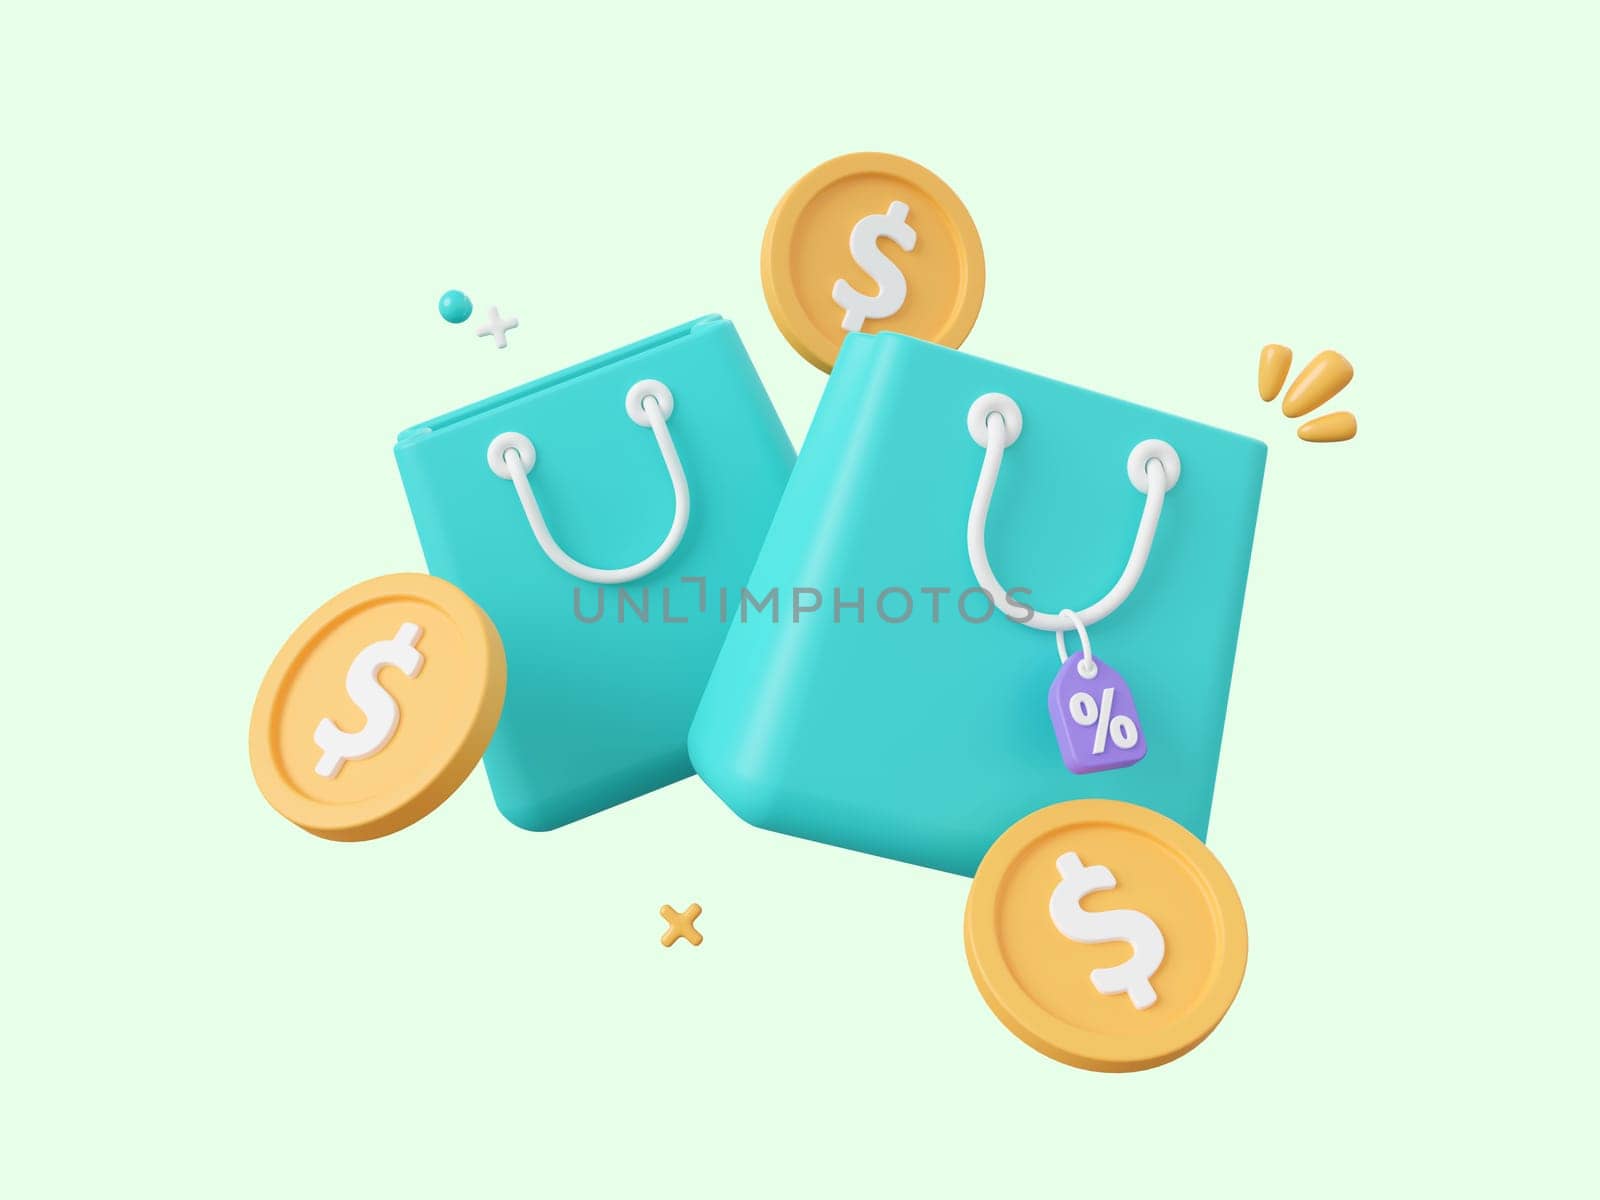 3d cartoon design illustration of Shopping bags with discount tag and dollar coin. Shopping online concept.